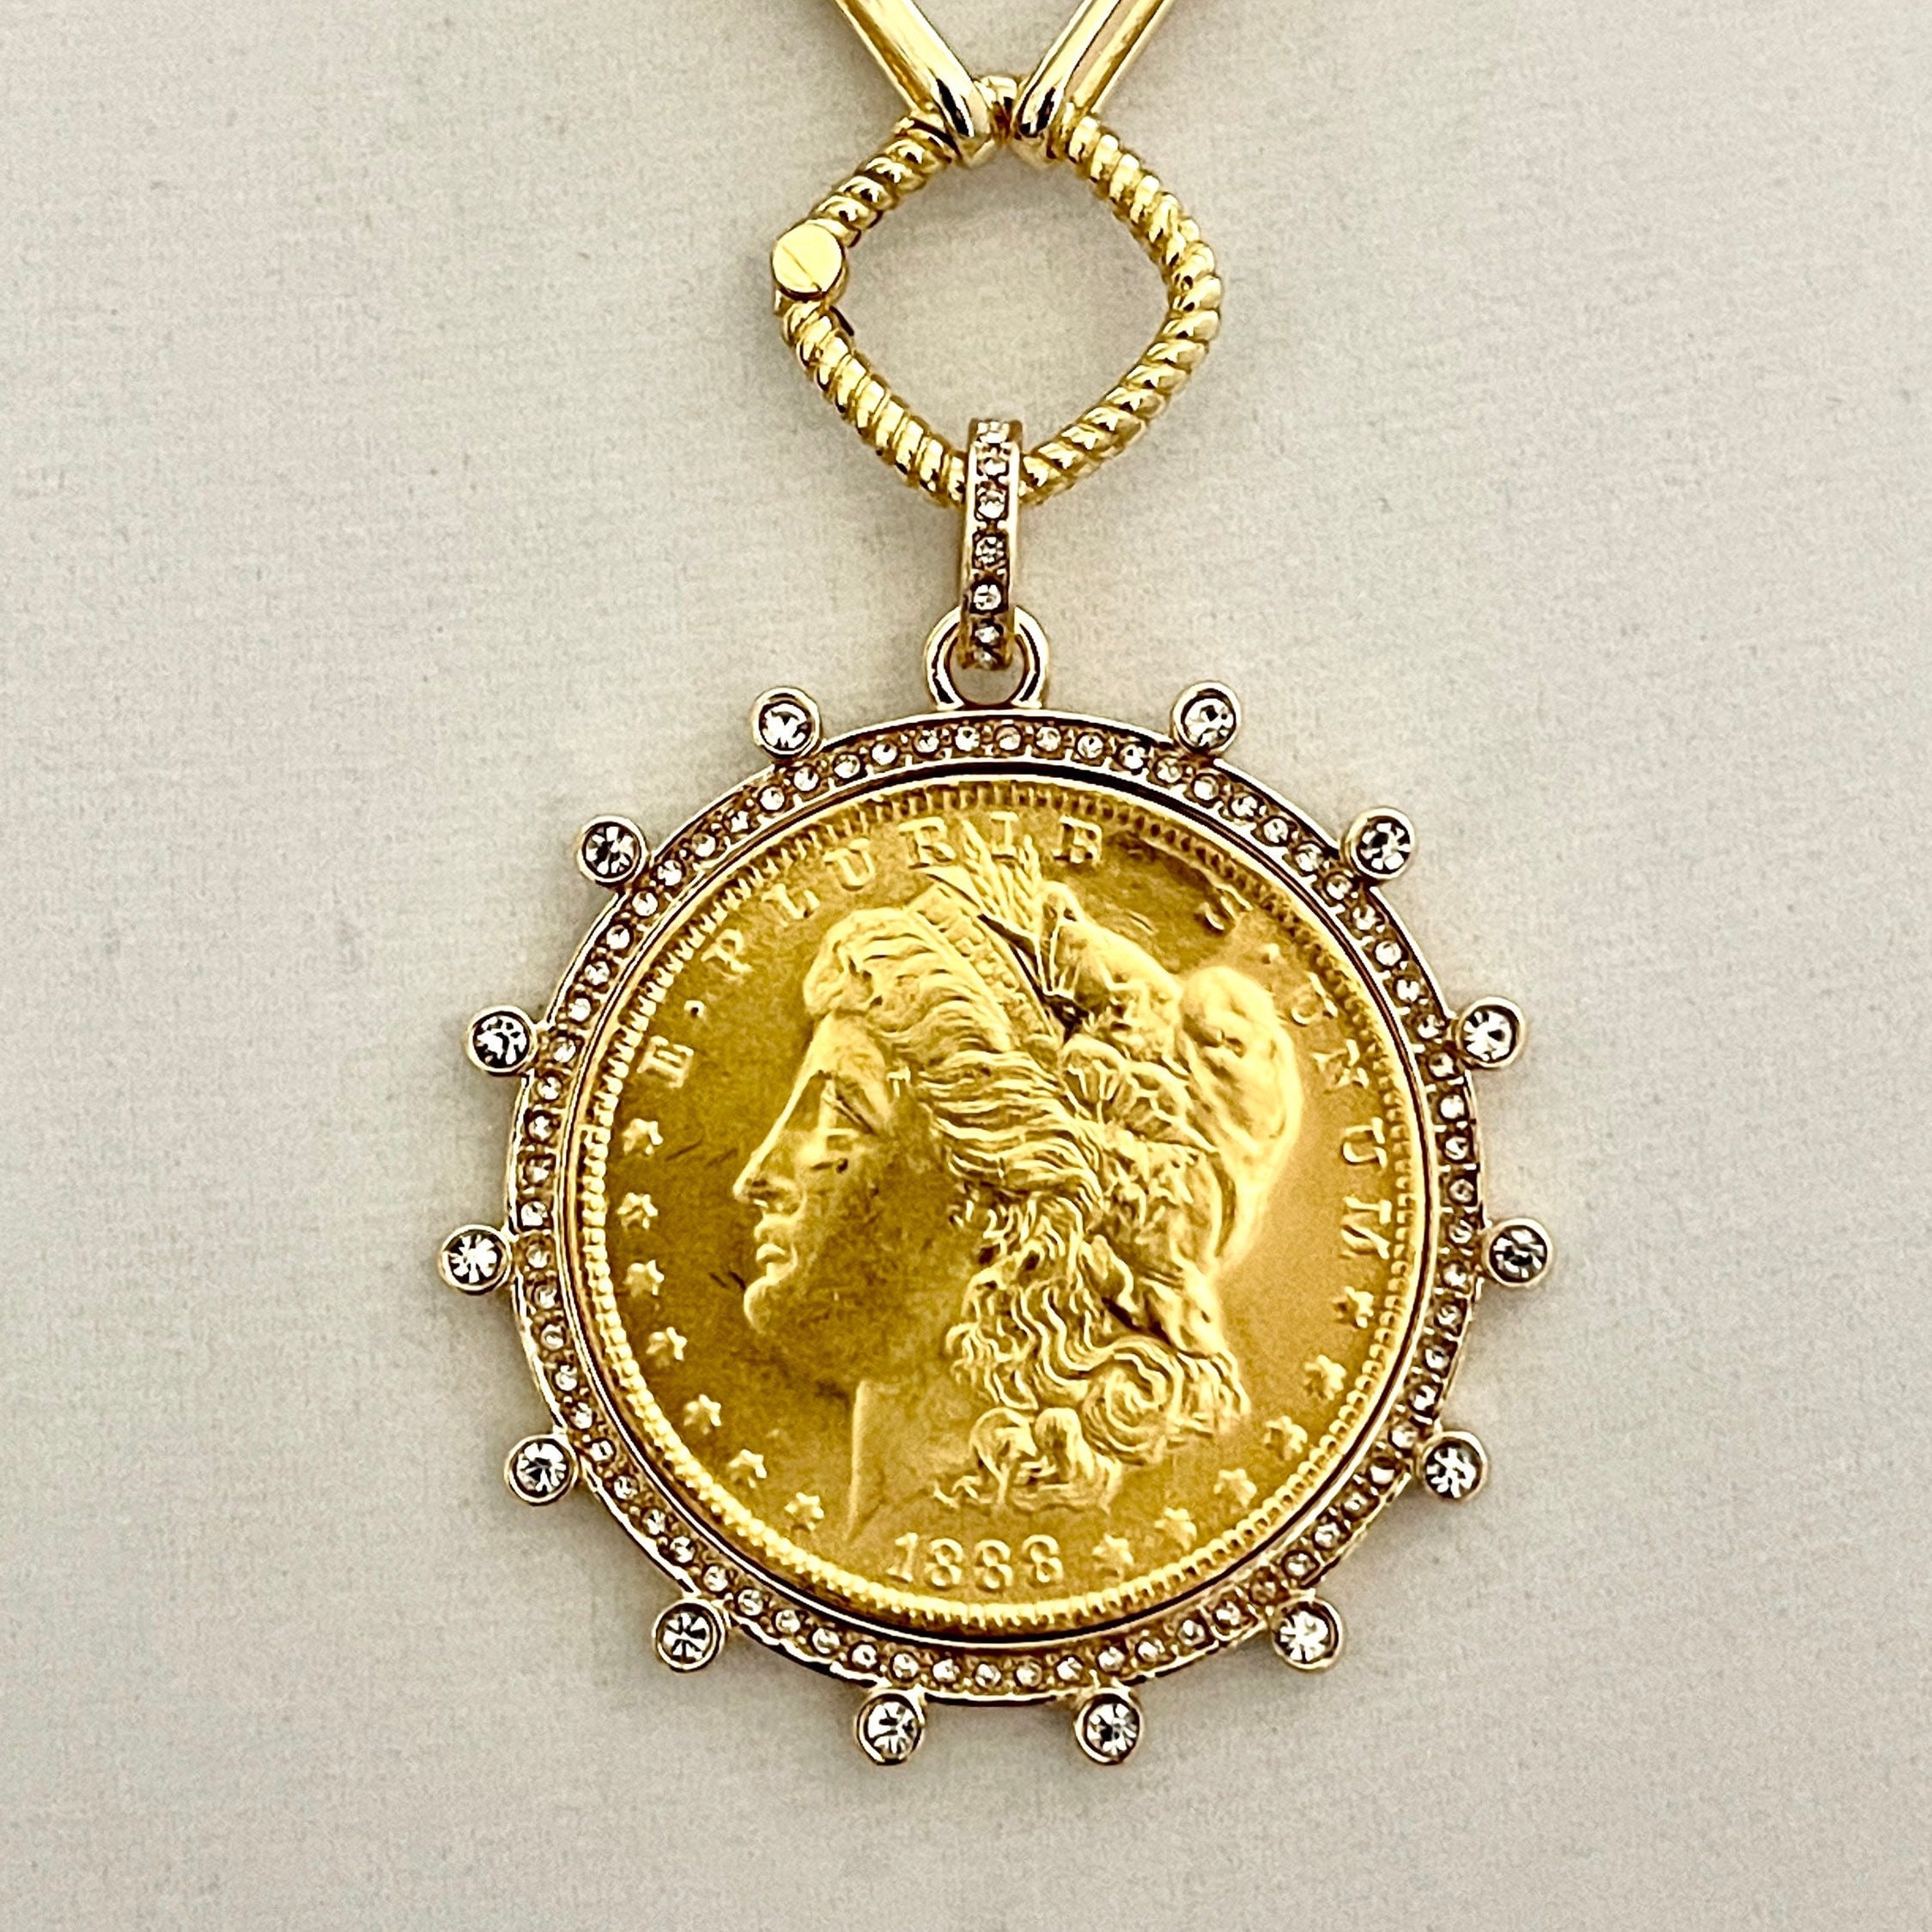 1926 REAL PEACE SILVER DOLLAR GOLDPLATED PENDANT 18 INCH CHAIN EBS1280OTH